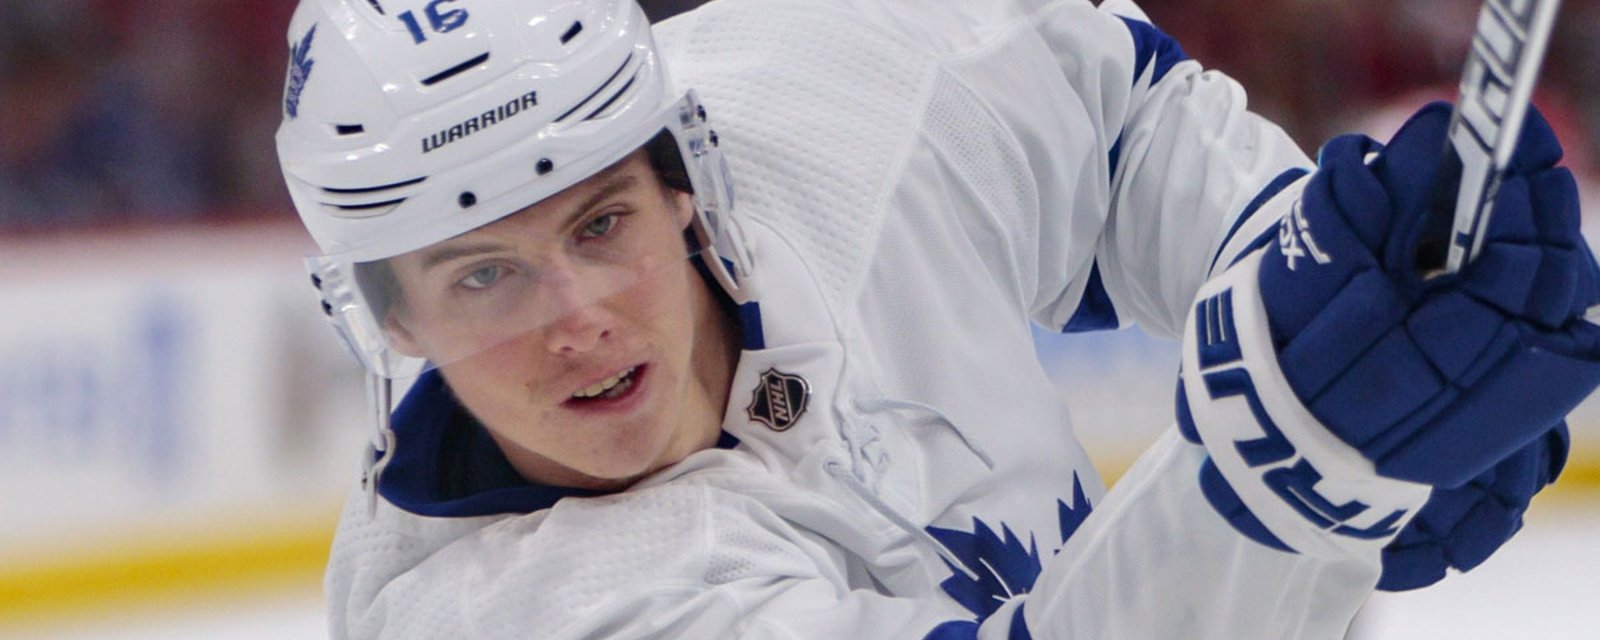 Finally some encouraging news from the Leafs and Marner! 